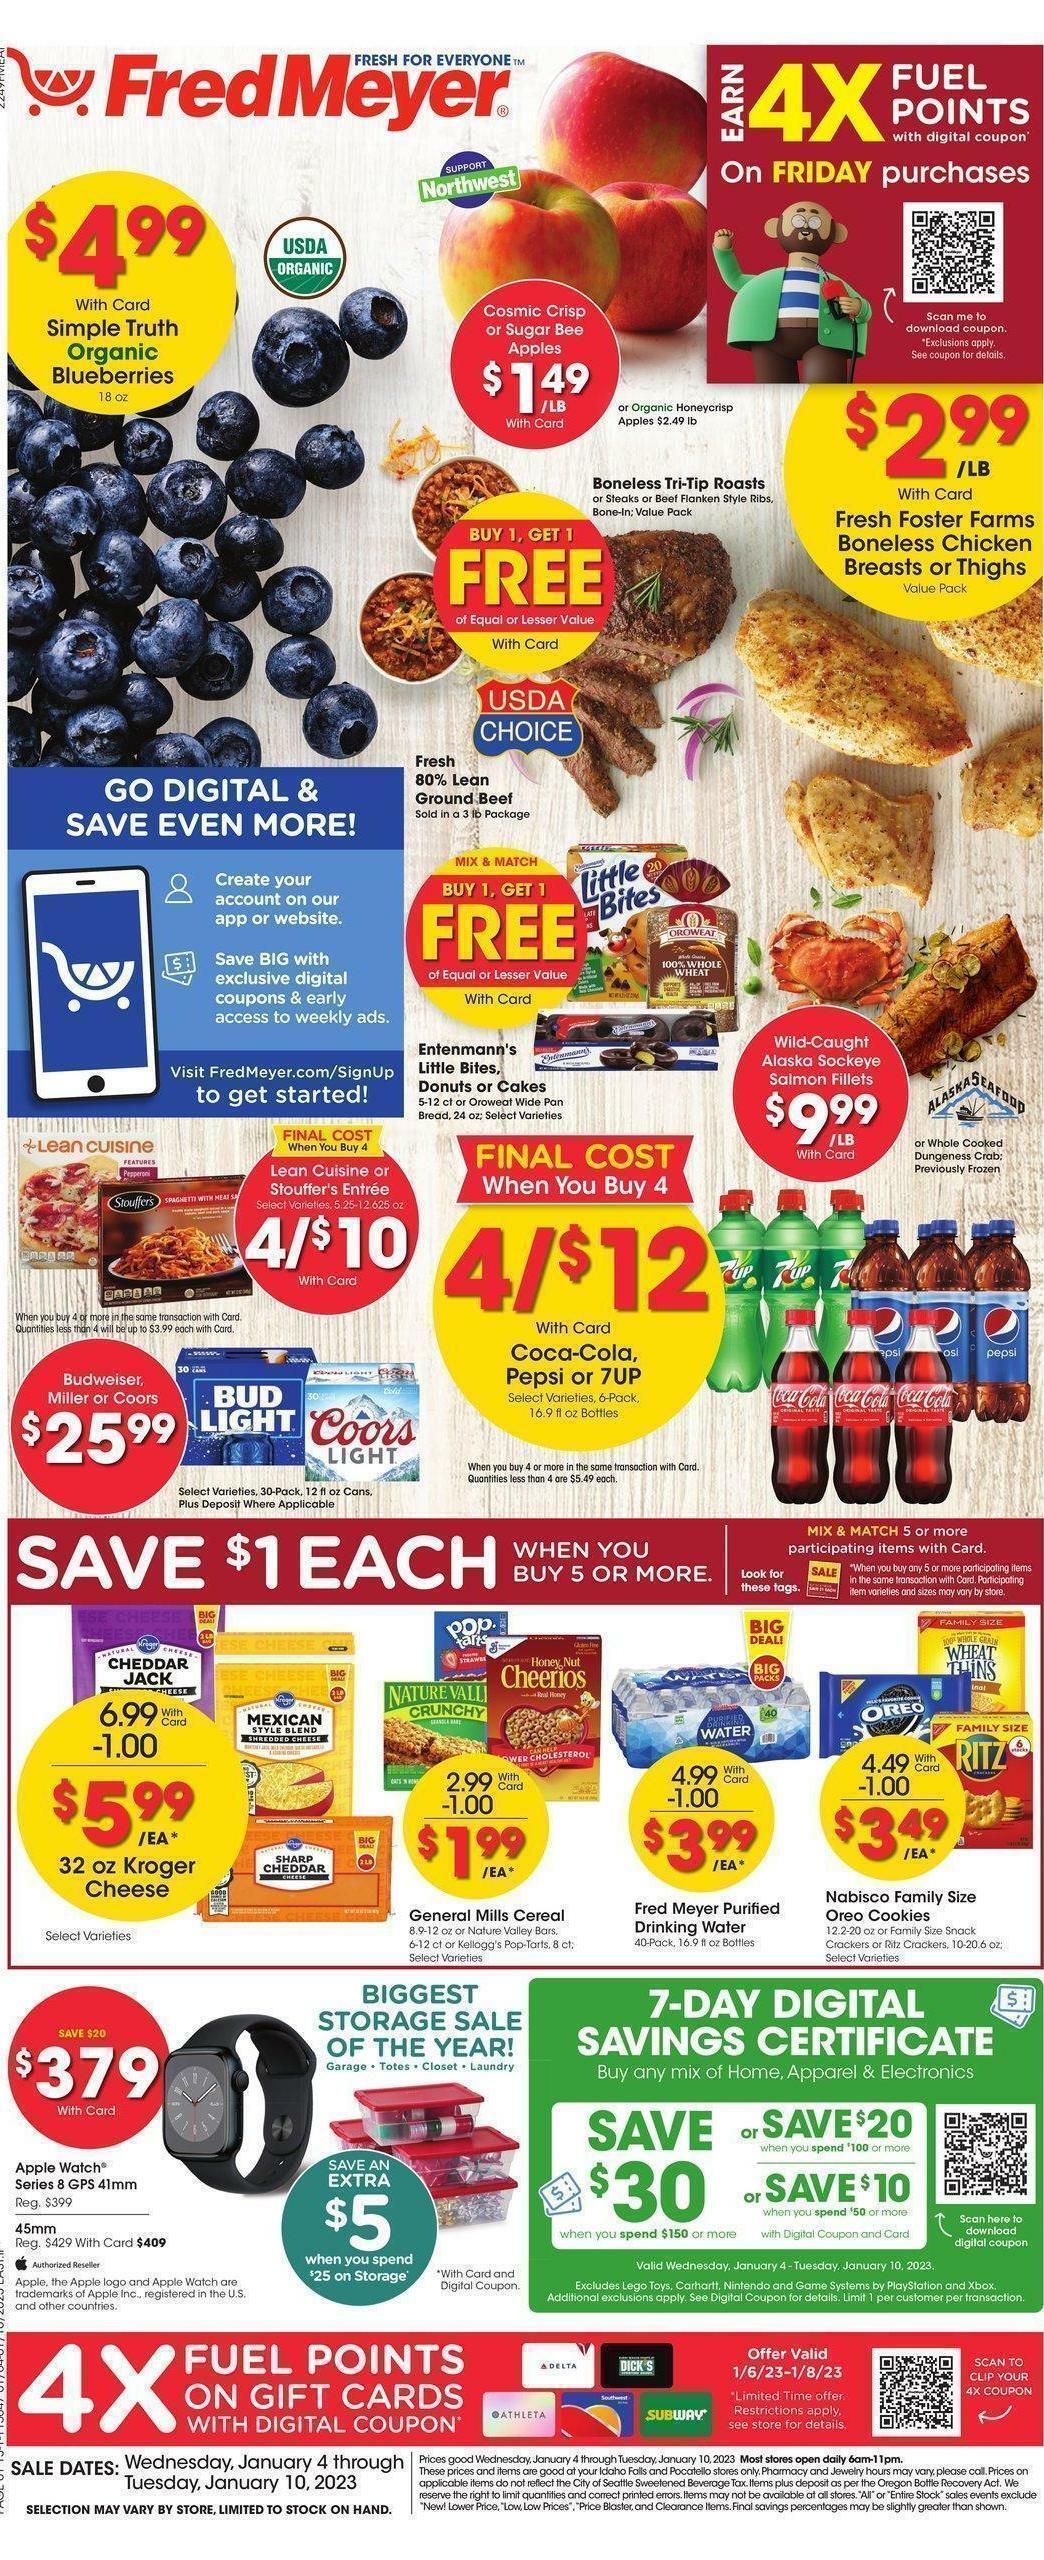 Fred Meyer Weekly Ad from January 4